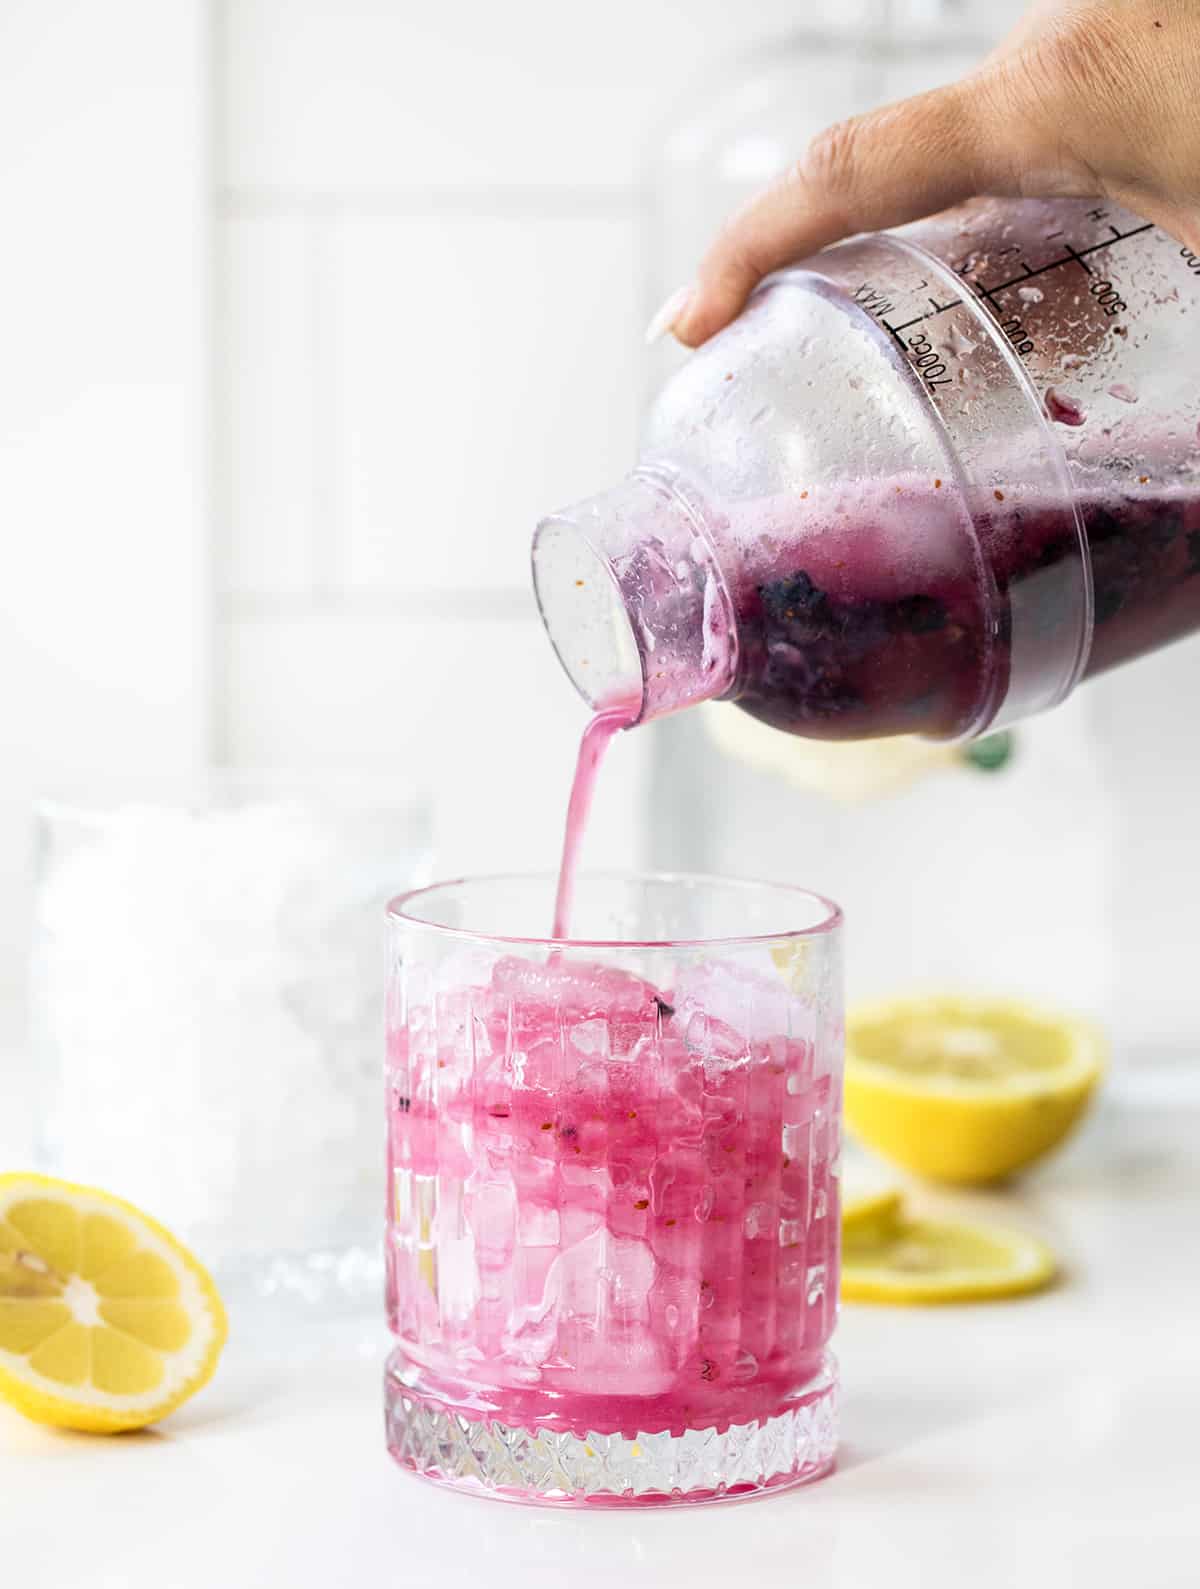 Pouring Freshly Shaken Spiked Blueberry Lemonade from Shaker Into Glass with Ice in It on a White Counter with Lemons.